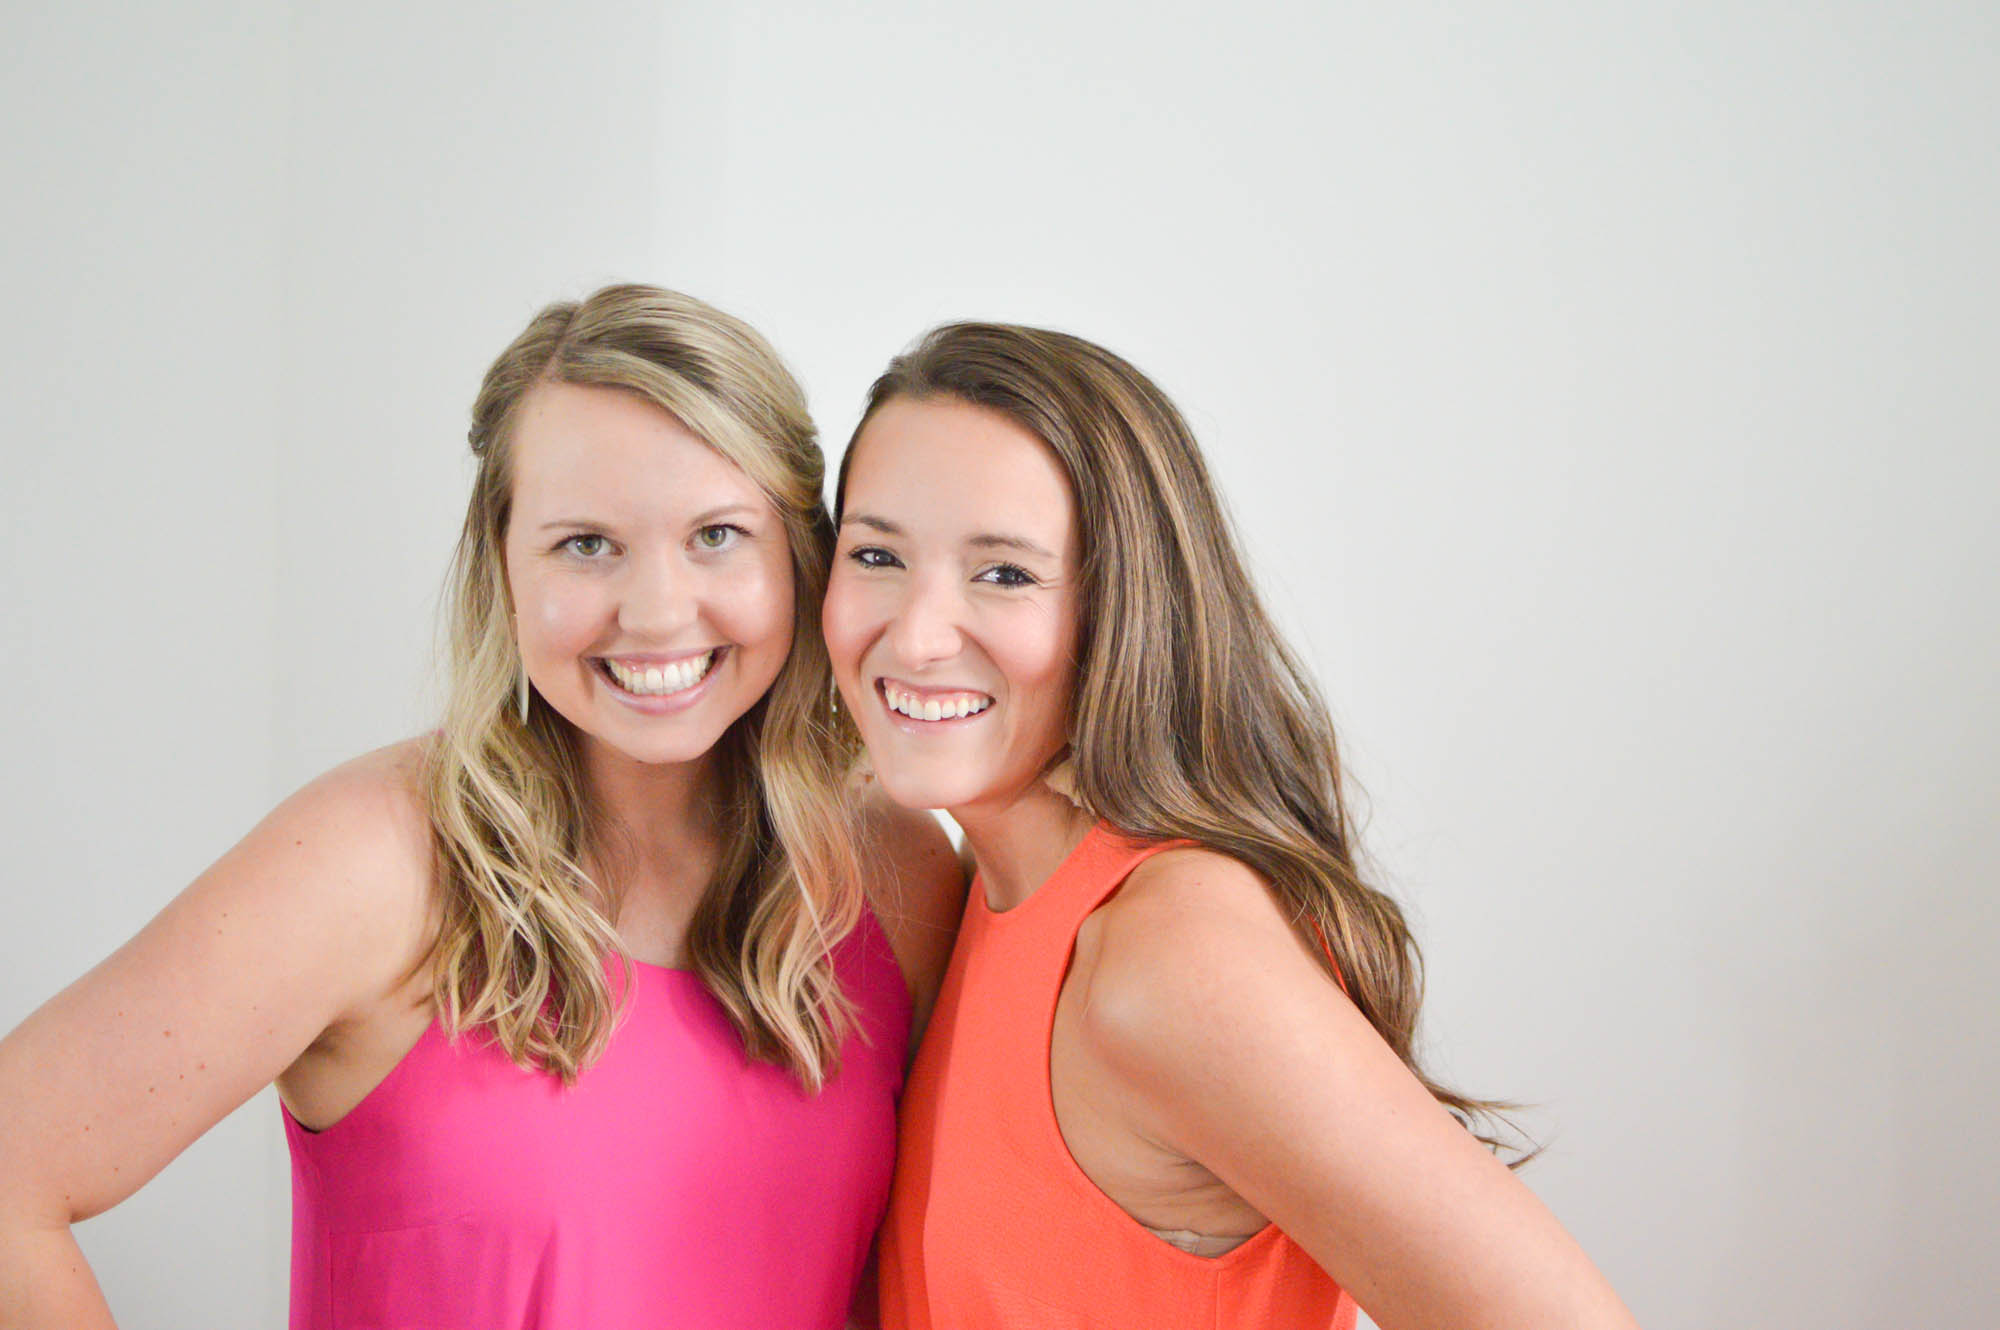 Kat Schmoyer and Megan Martin, hosts of Talking Small Business Podcast